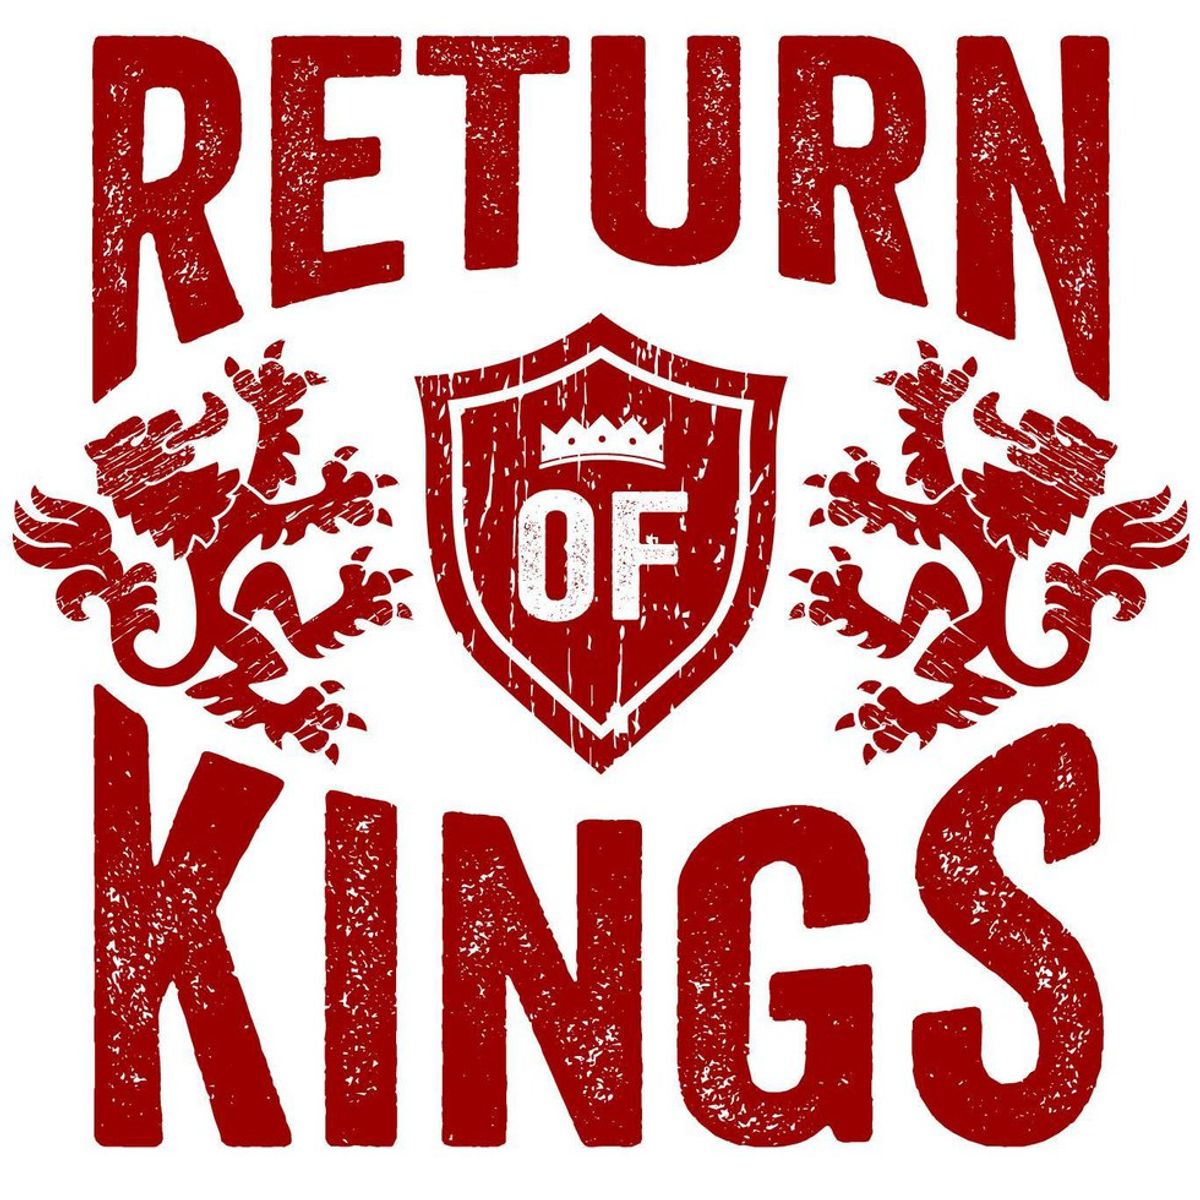 Misogynistic Group "Return of Kings" Sets International Meetup Day